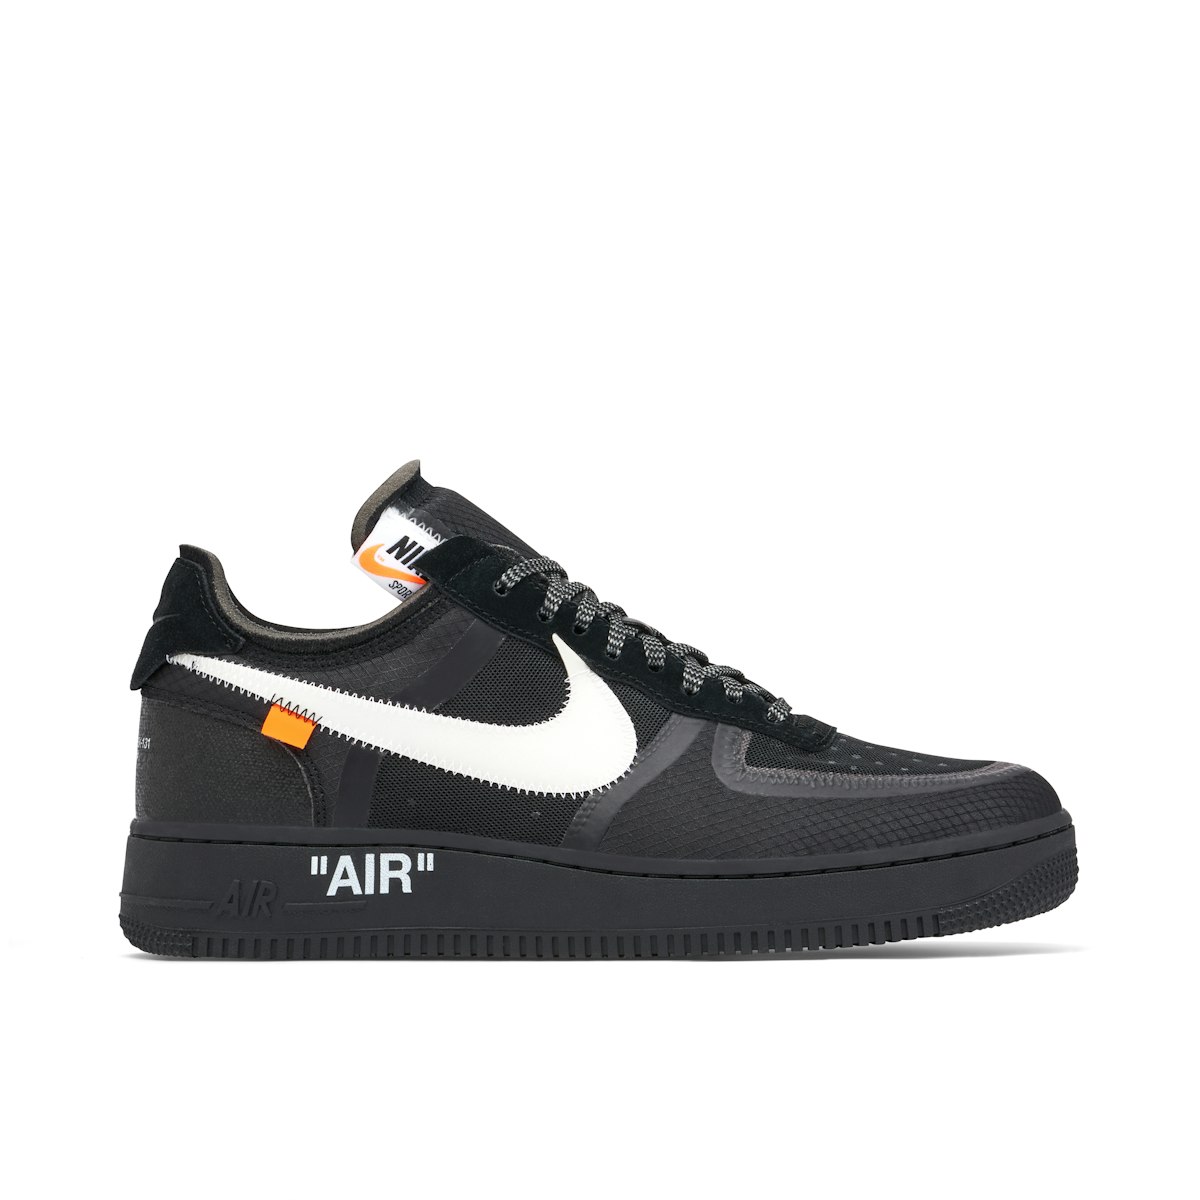 black air force 1 with off white laces｜TikTok Search